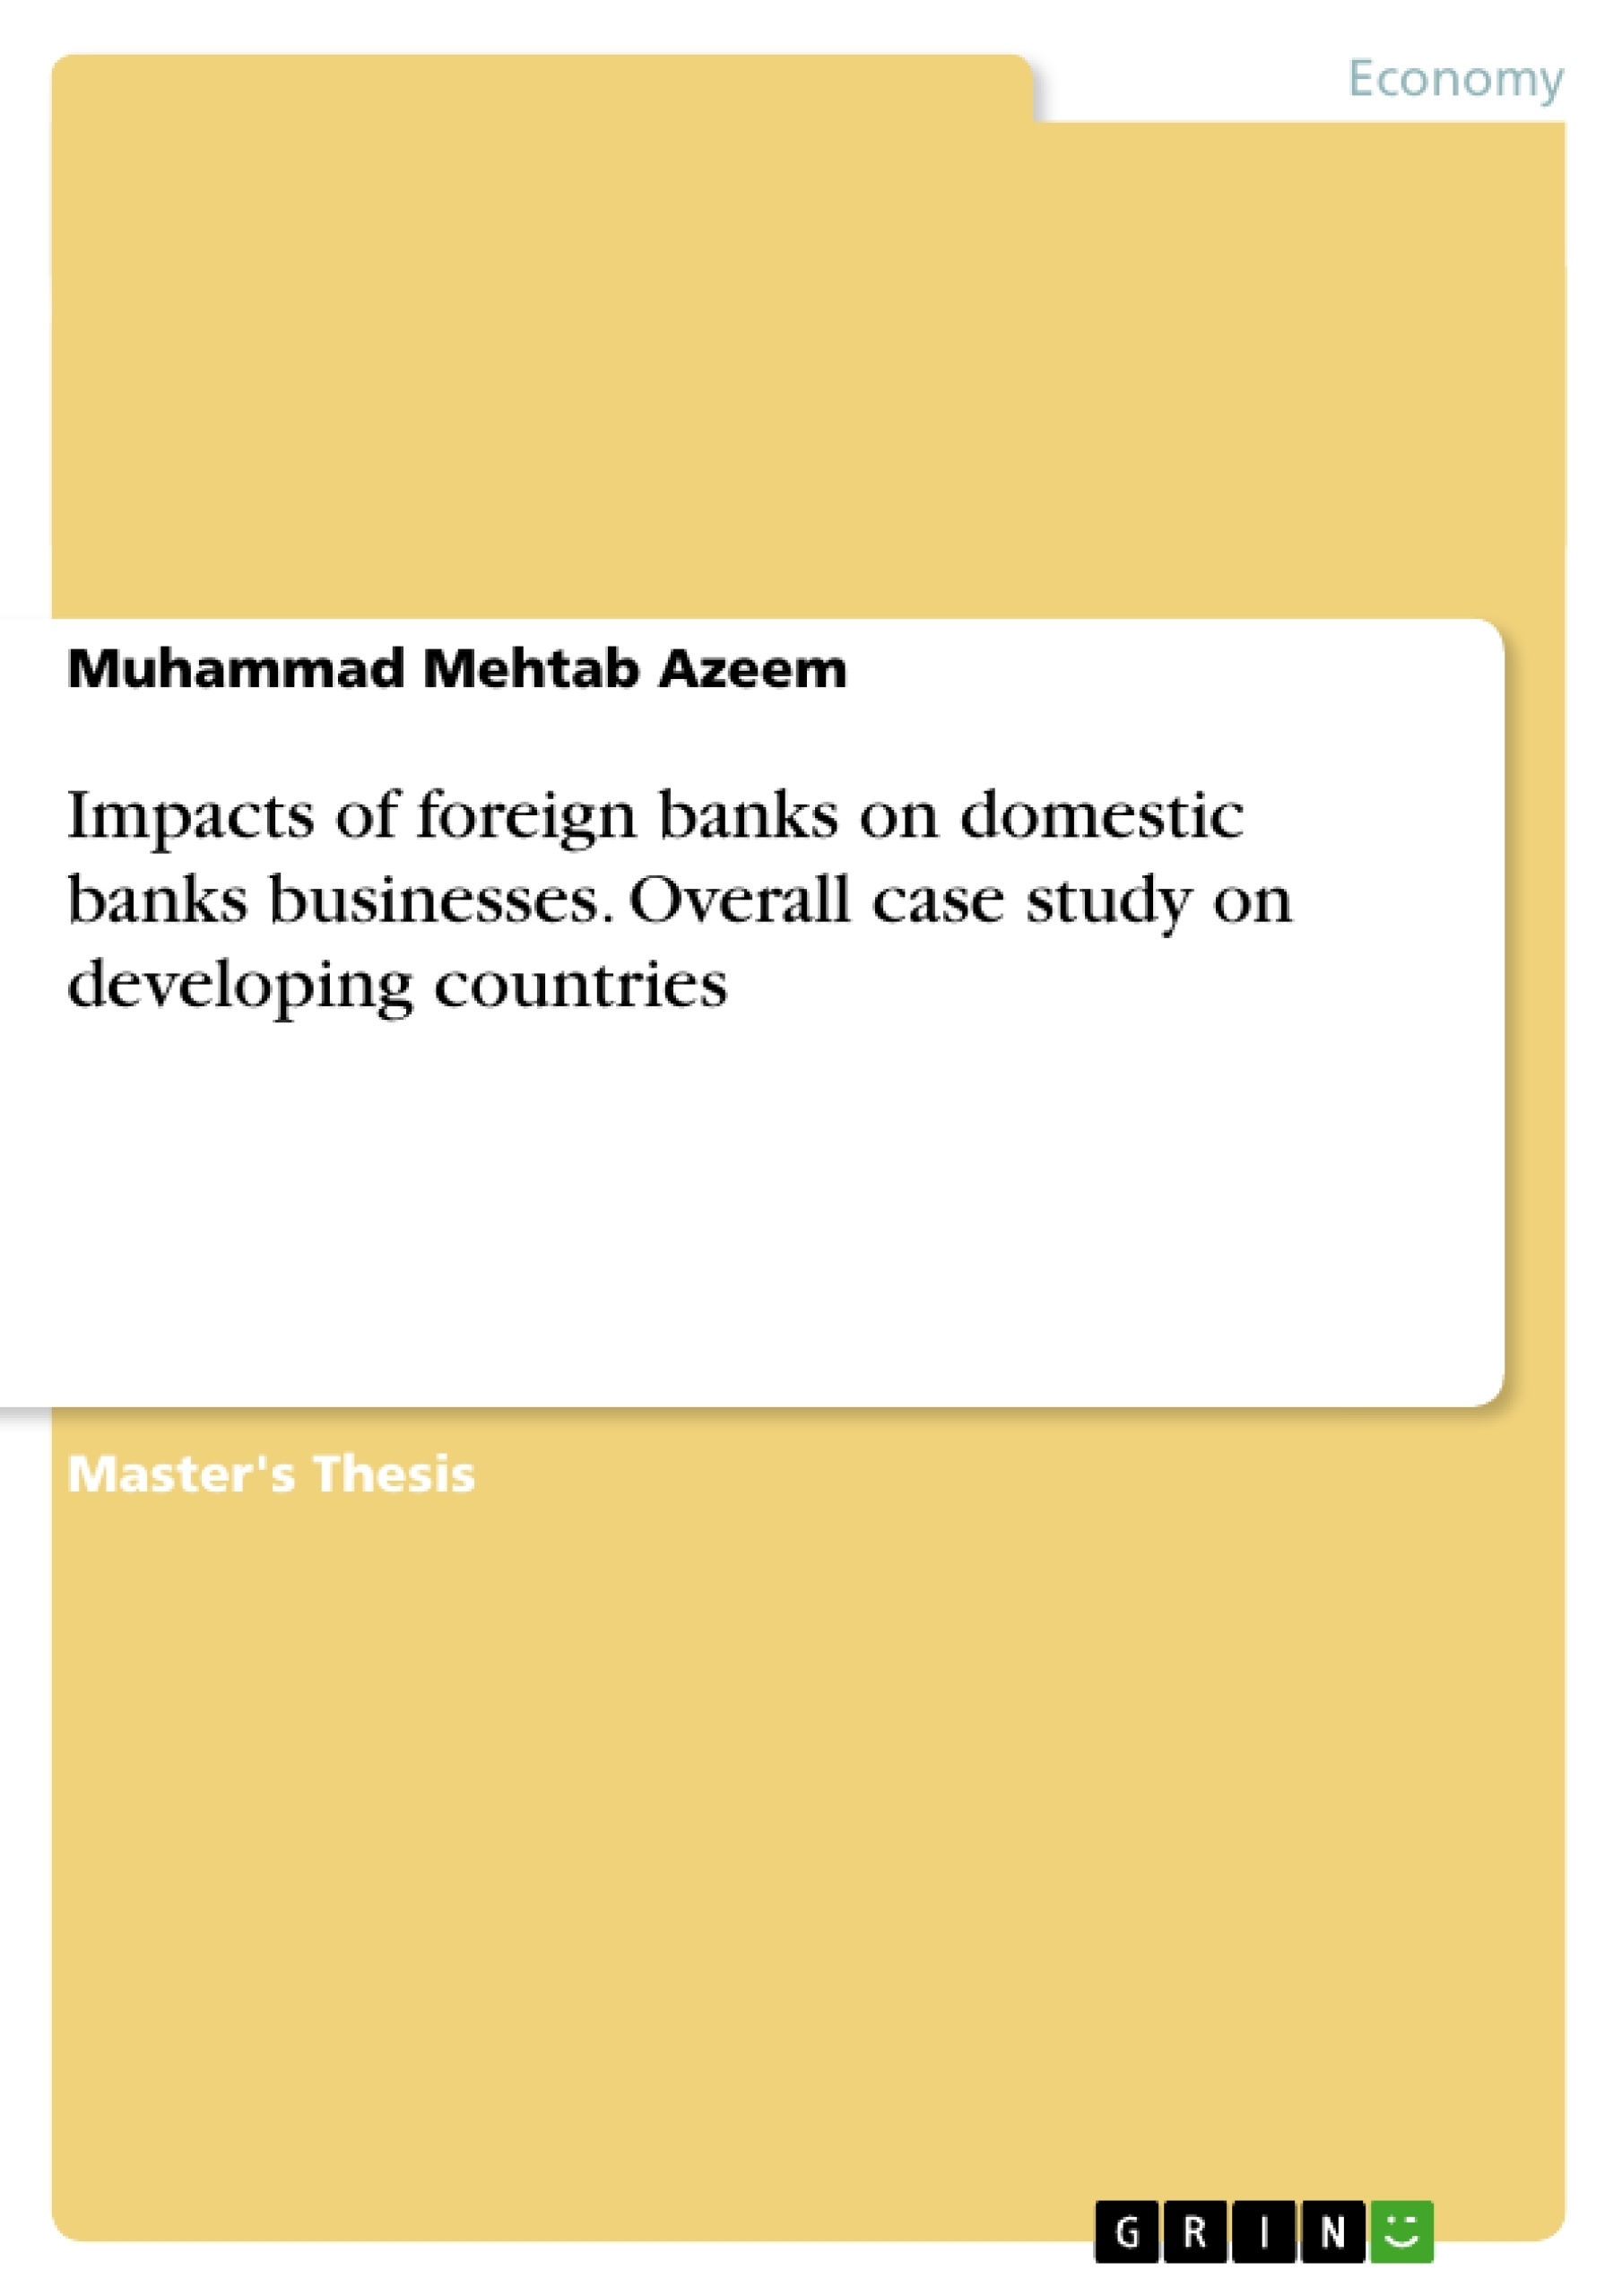 Title: Impacts of foreign banks on domestic banks businesses. Overall case study on developing countries